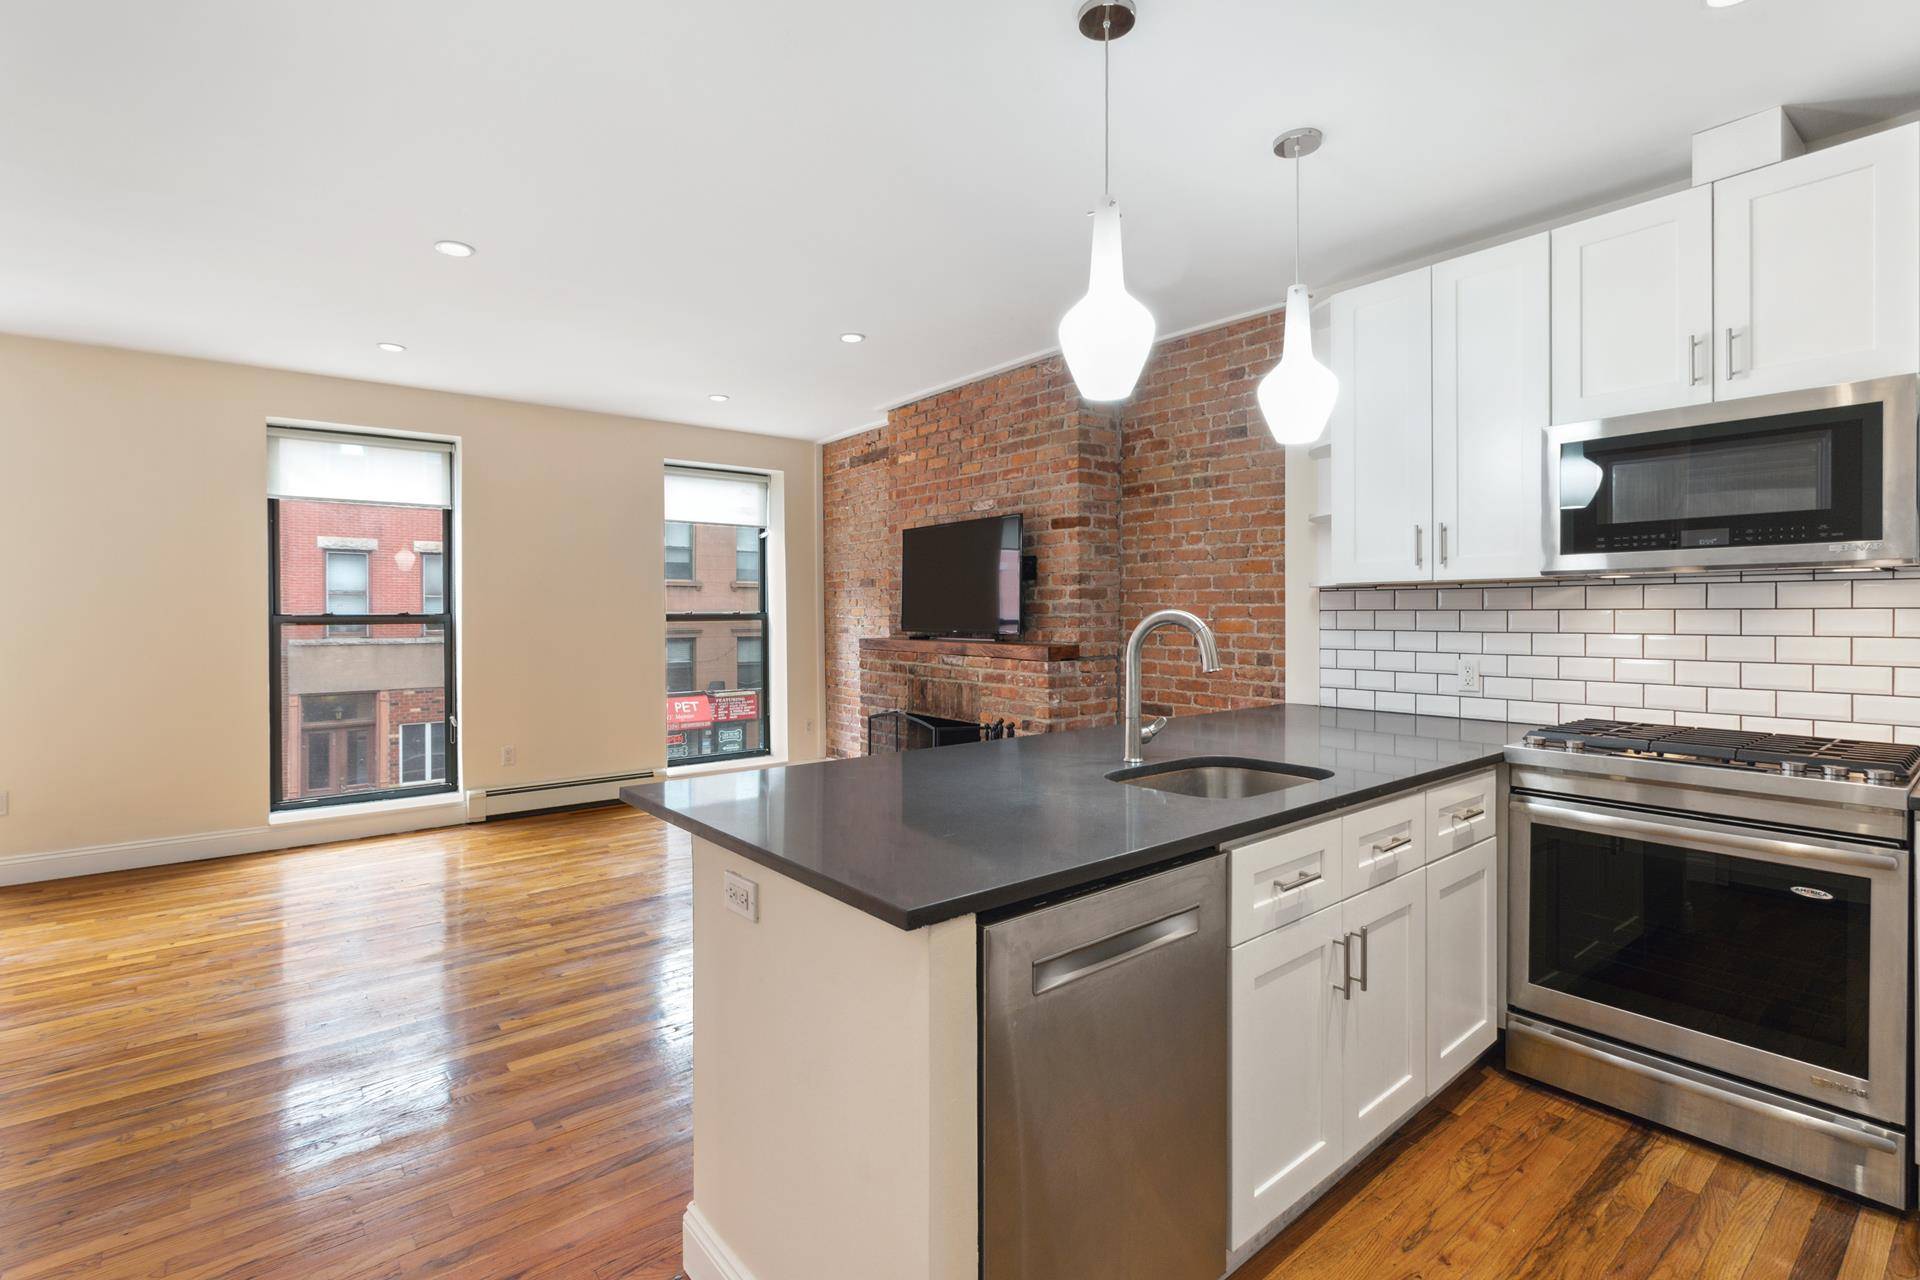 Private Backyard in a 2 bedroom CondoWasher Dryer in the UnitDishwasherCome view this beautifully renovated, sunny and opentwo bedroom, one bath Carroll Gardens condo, right away.